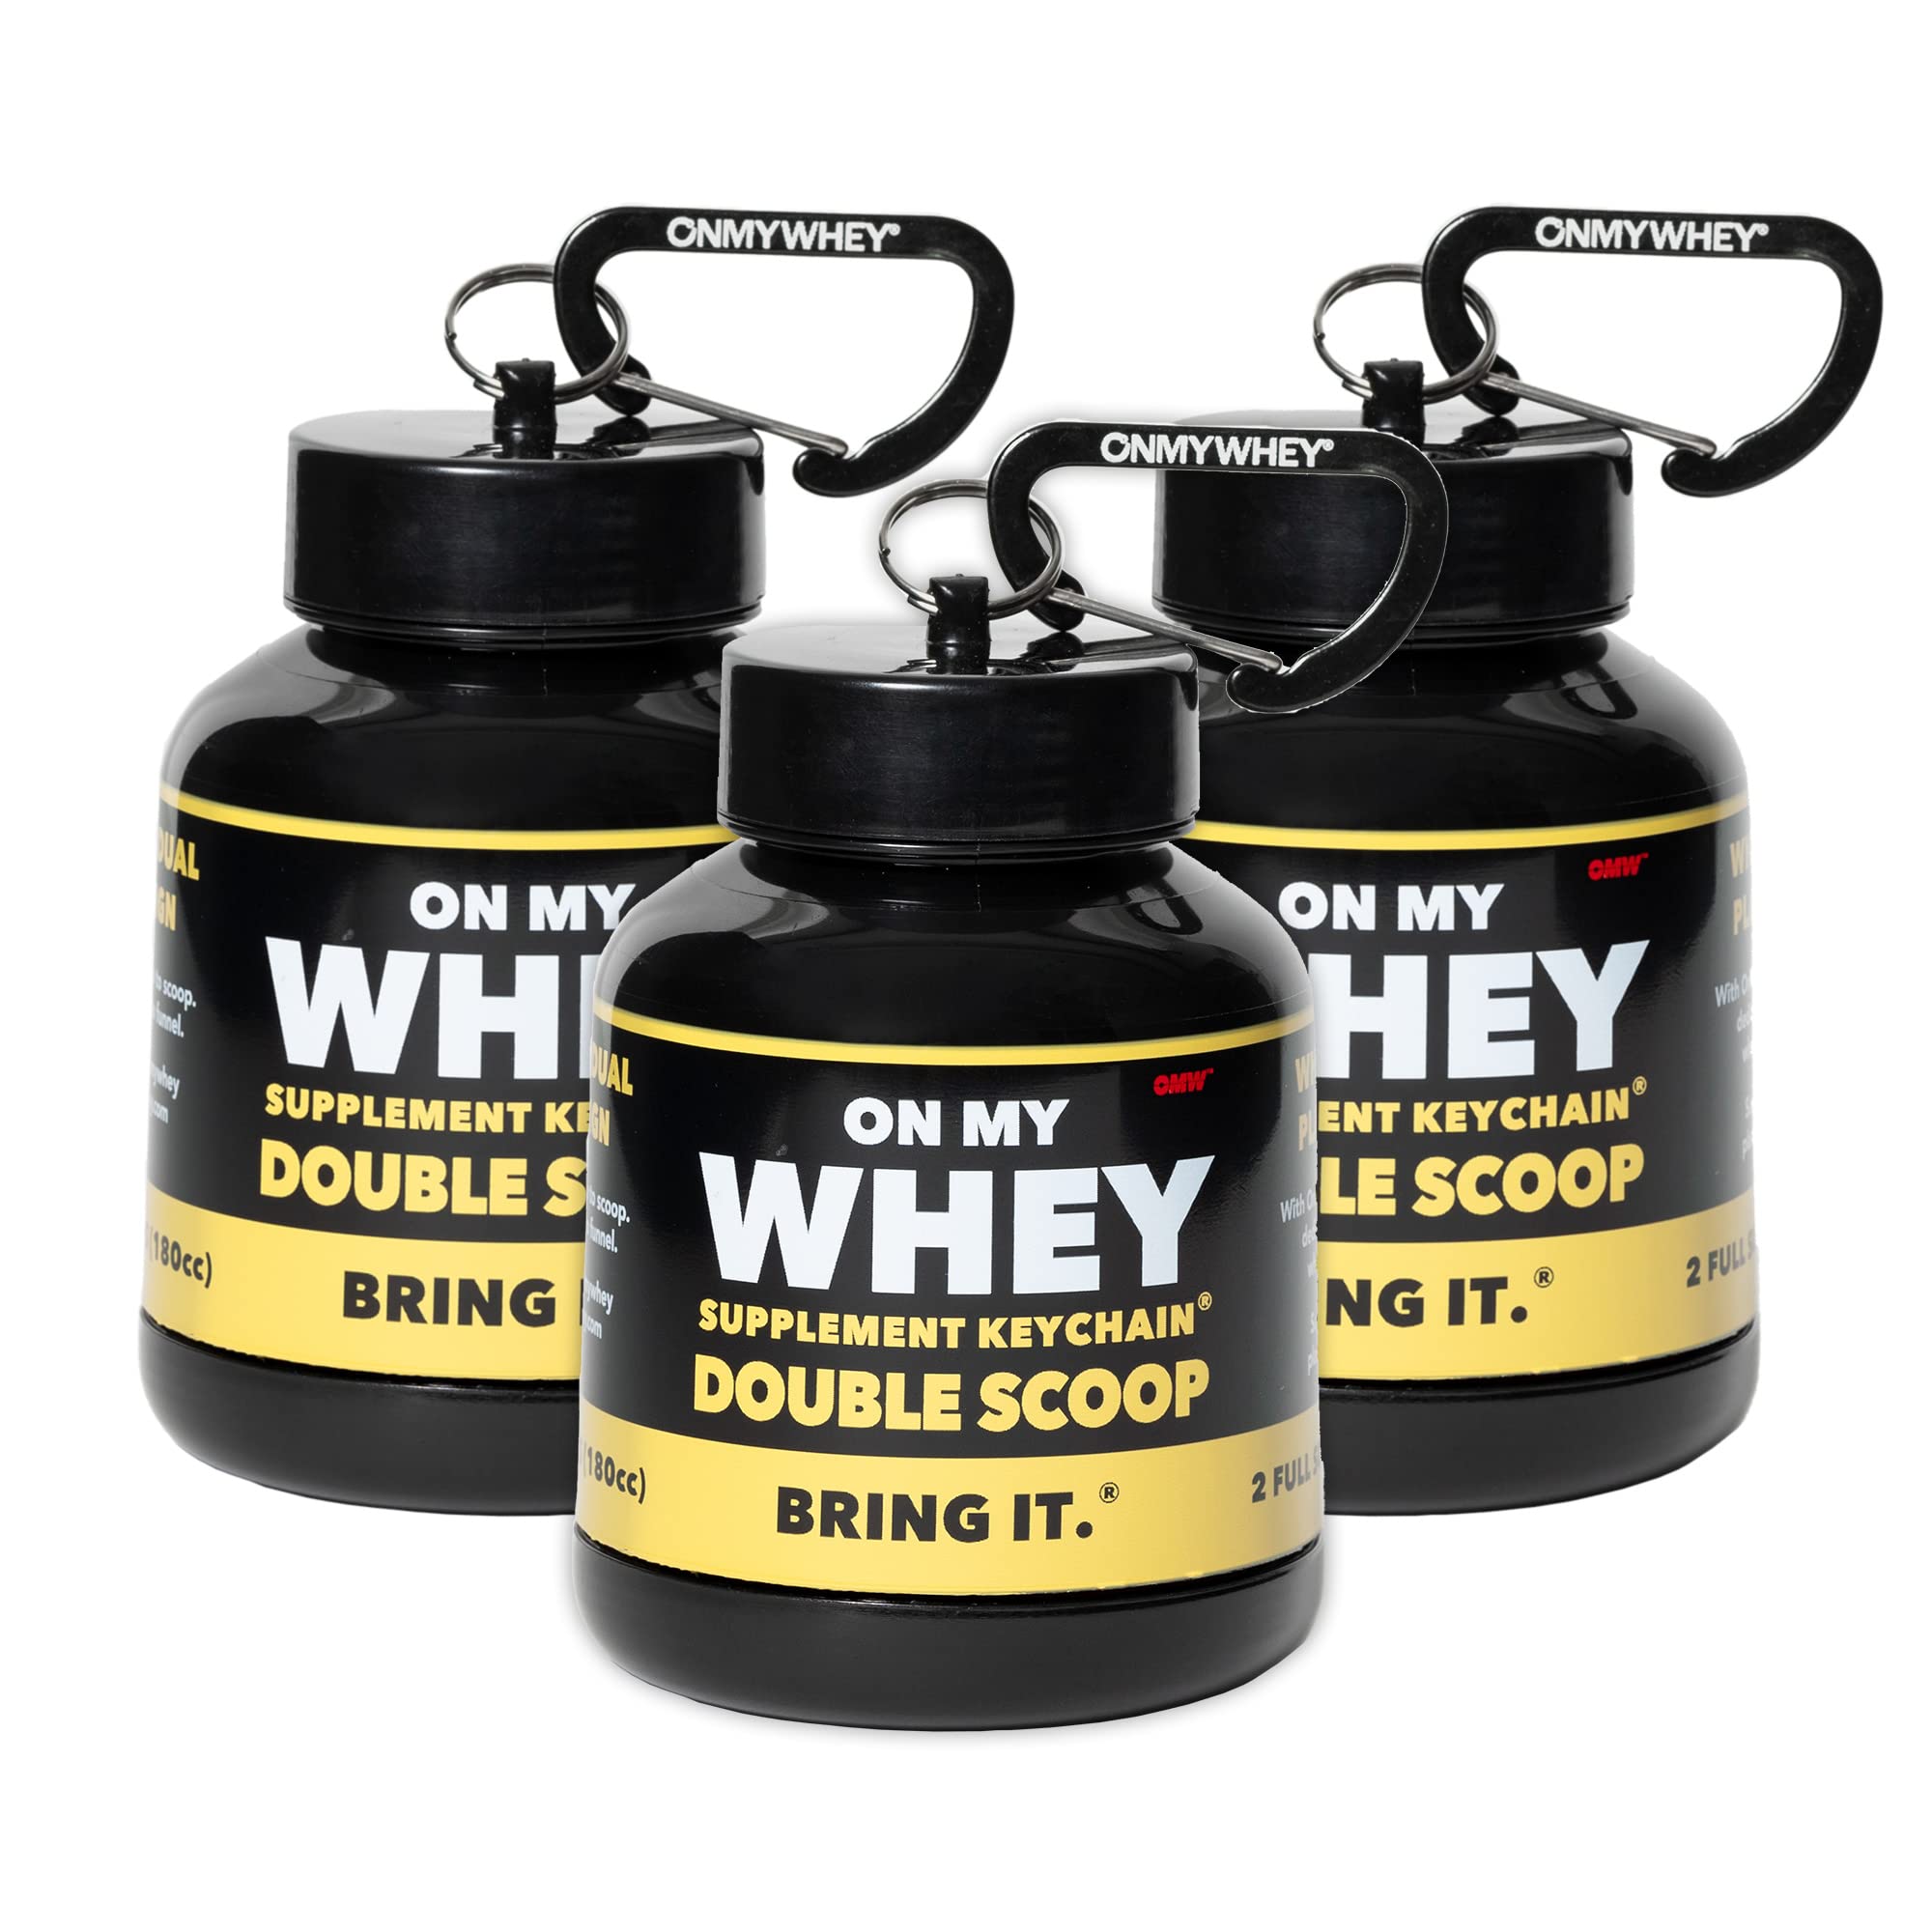 OnMyWhey - Portable Protein and Supplement Powder Funnel Key-Chain - Modern 3-Pack